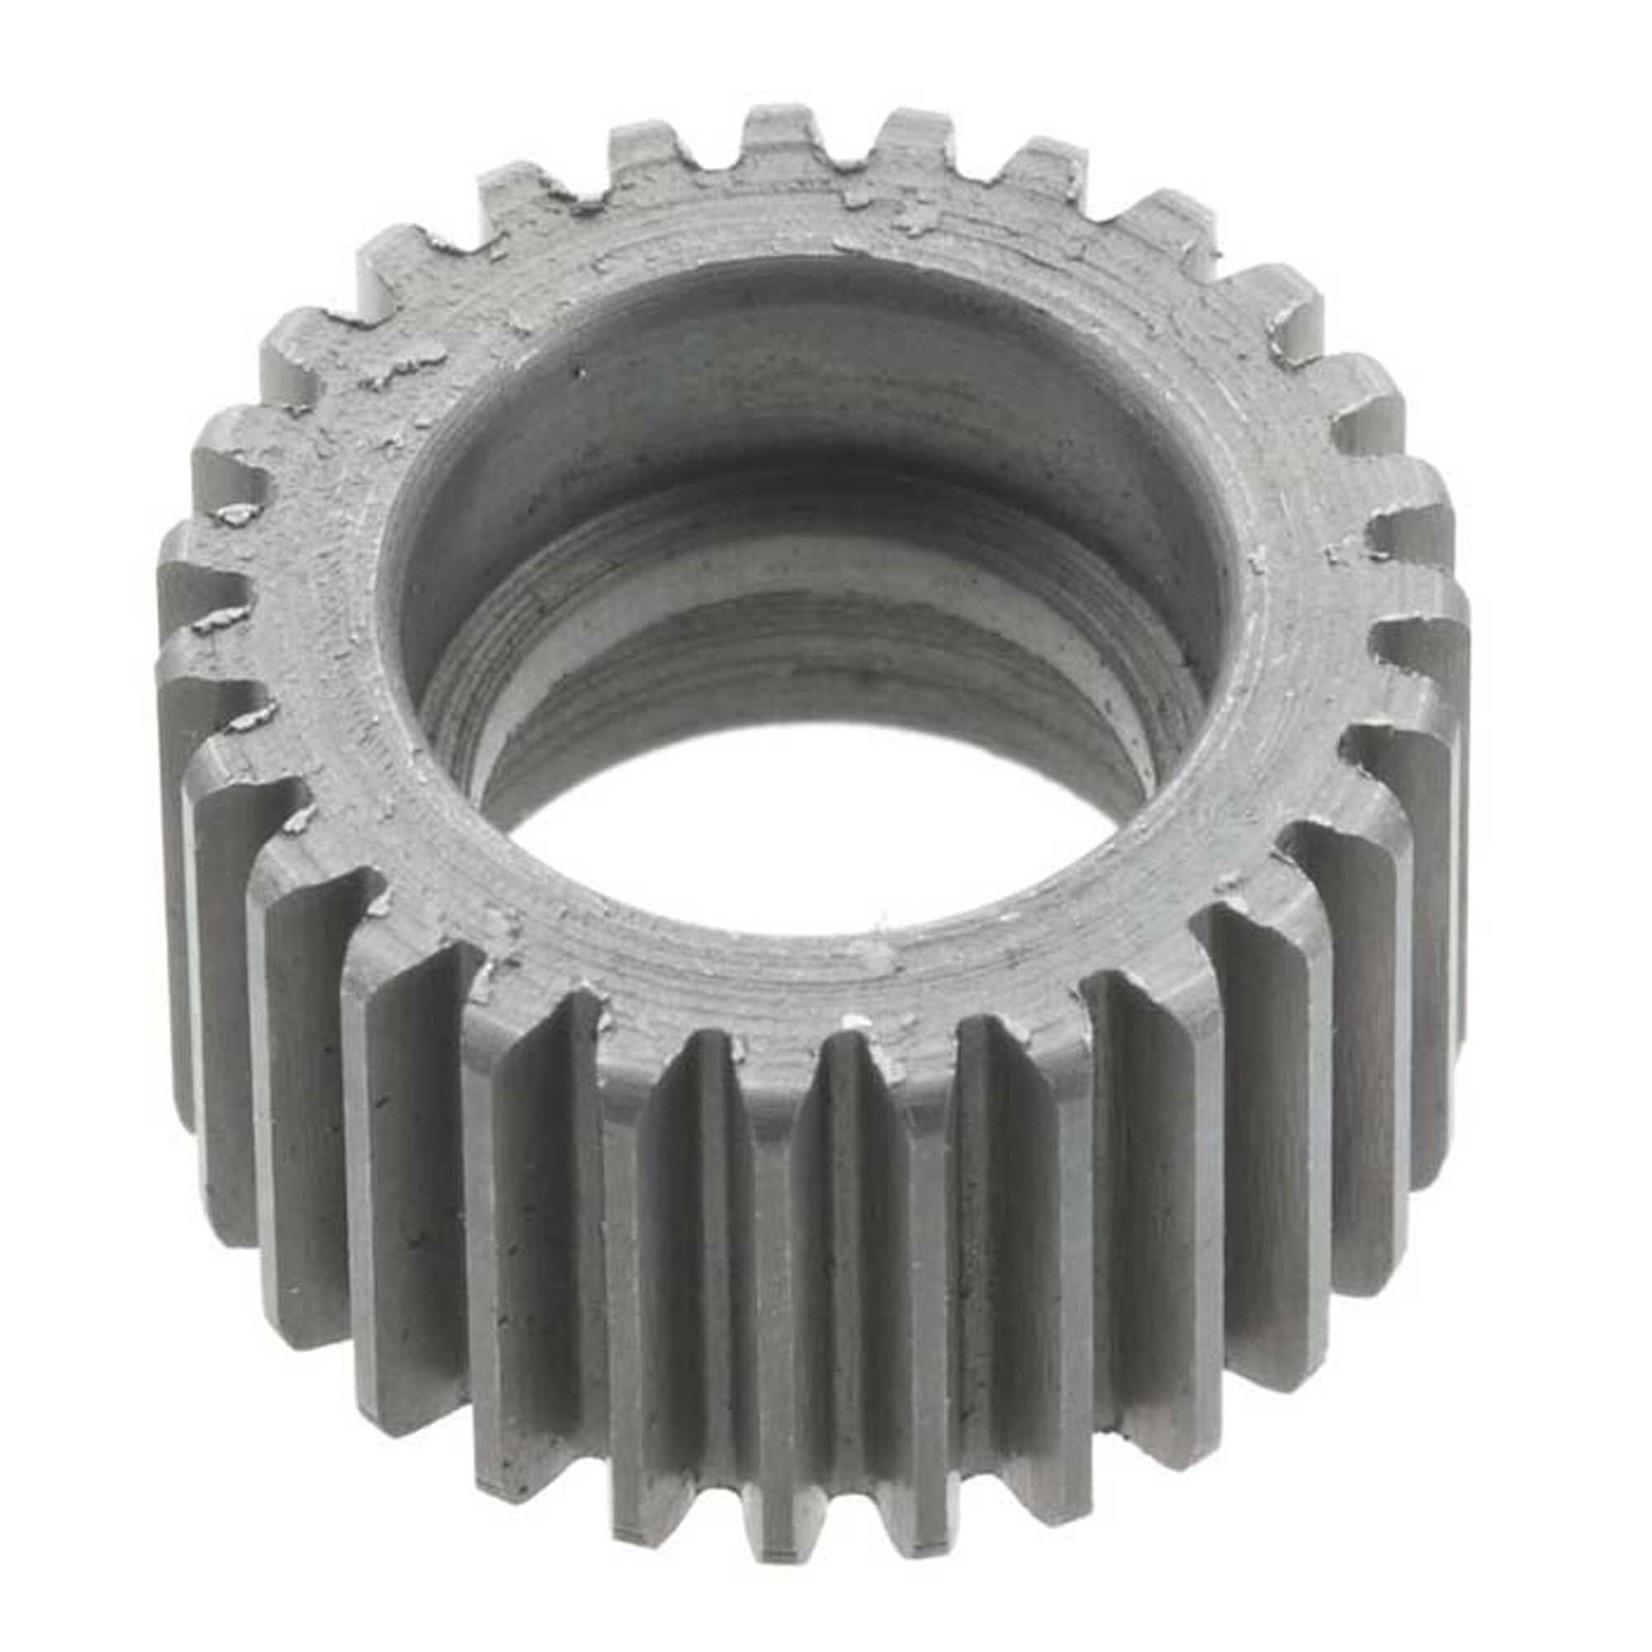 Robinson Racing Products (RRP) Hardened Steel Idler Gear: SC10